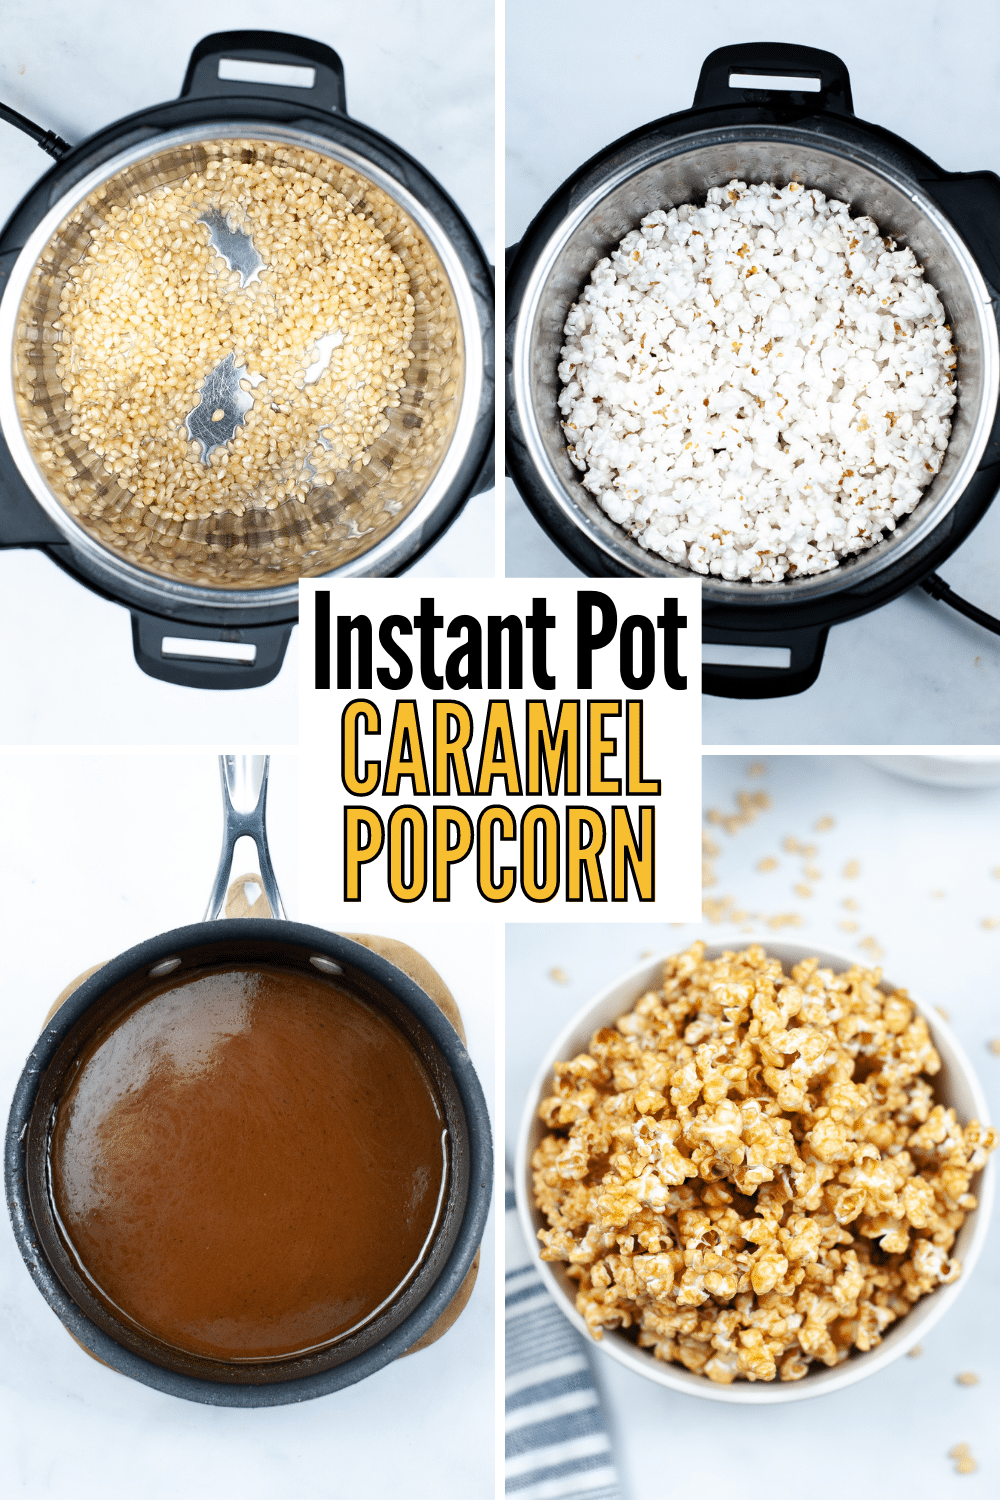 Instant Pot Caramel Popcorn is the perfect sweet and salty snack. It's easy to make and only takes a few minutes in the Instant Pot. #instantpot #pressurecooker #caramelpopcorn #popcorn #recipe via @wondermomwannab